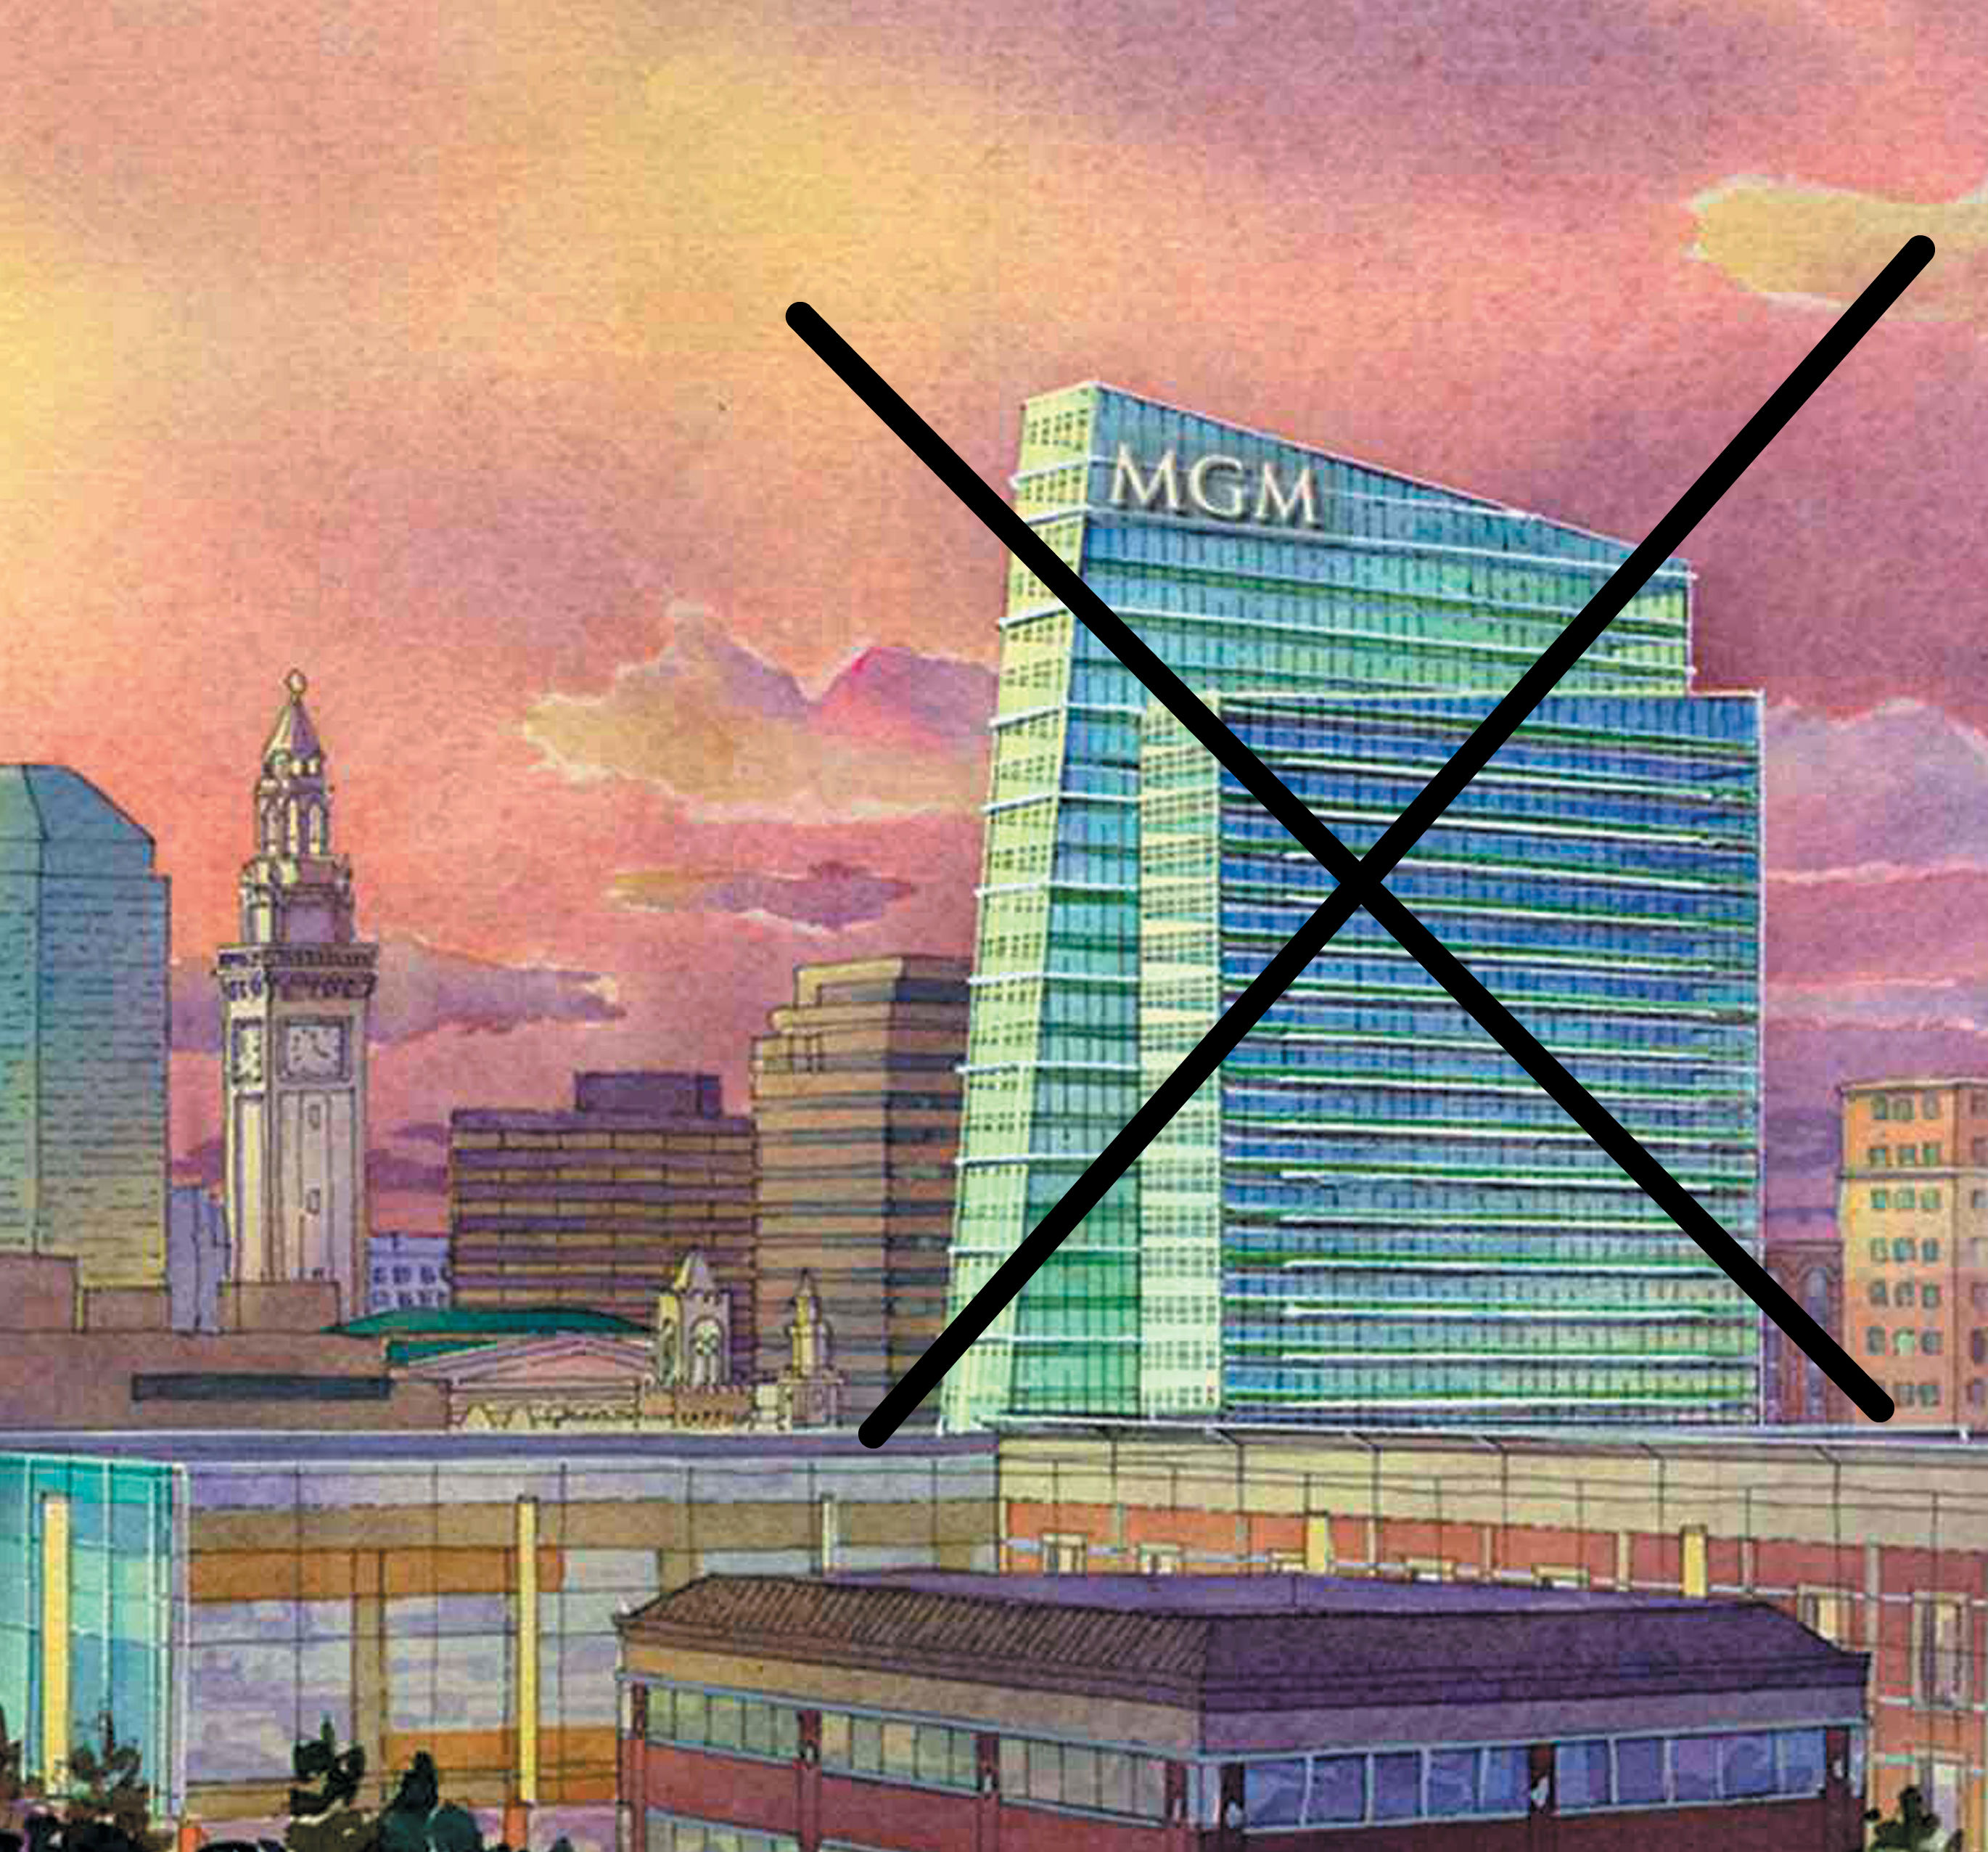 Bait and Switch? Cut and Run? or Just a Bump in the Road? Big changes test Springfield’s faith in MGM